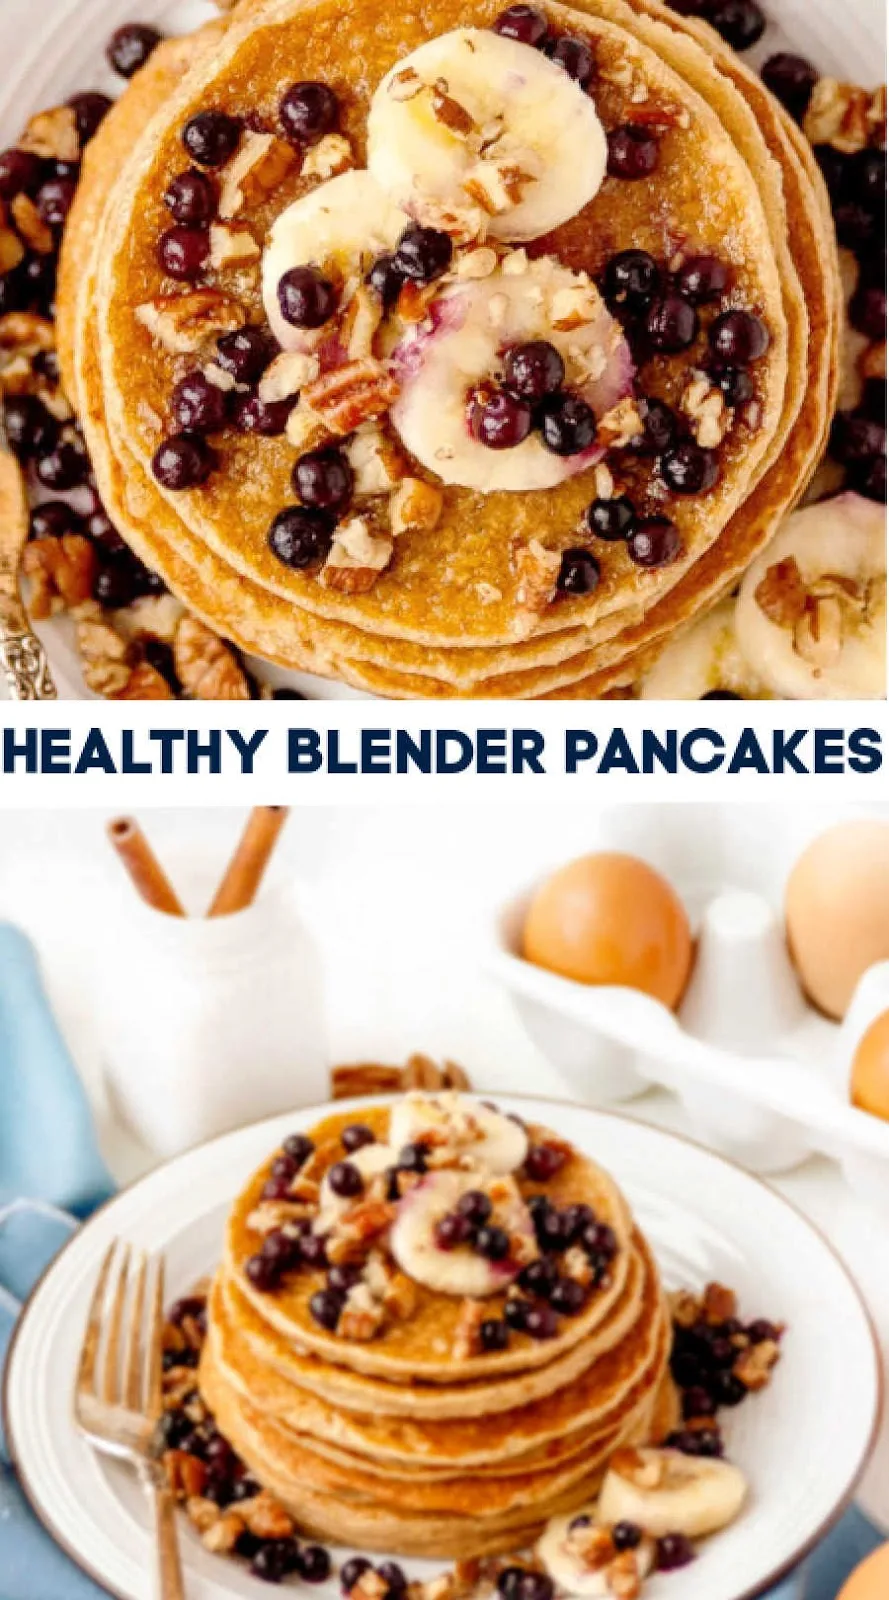 Make that breakfast staple, pancakes, healthier and super easy with these blender pancakes. There is no processed sugar,a hit of protein and lots of flavor to enjoy!